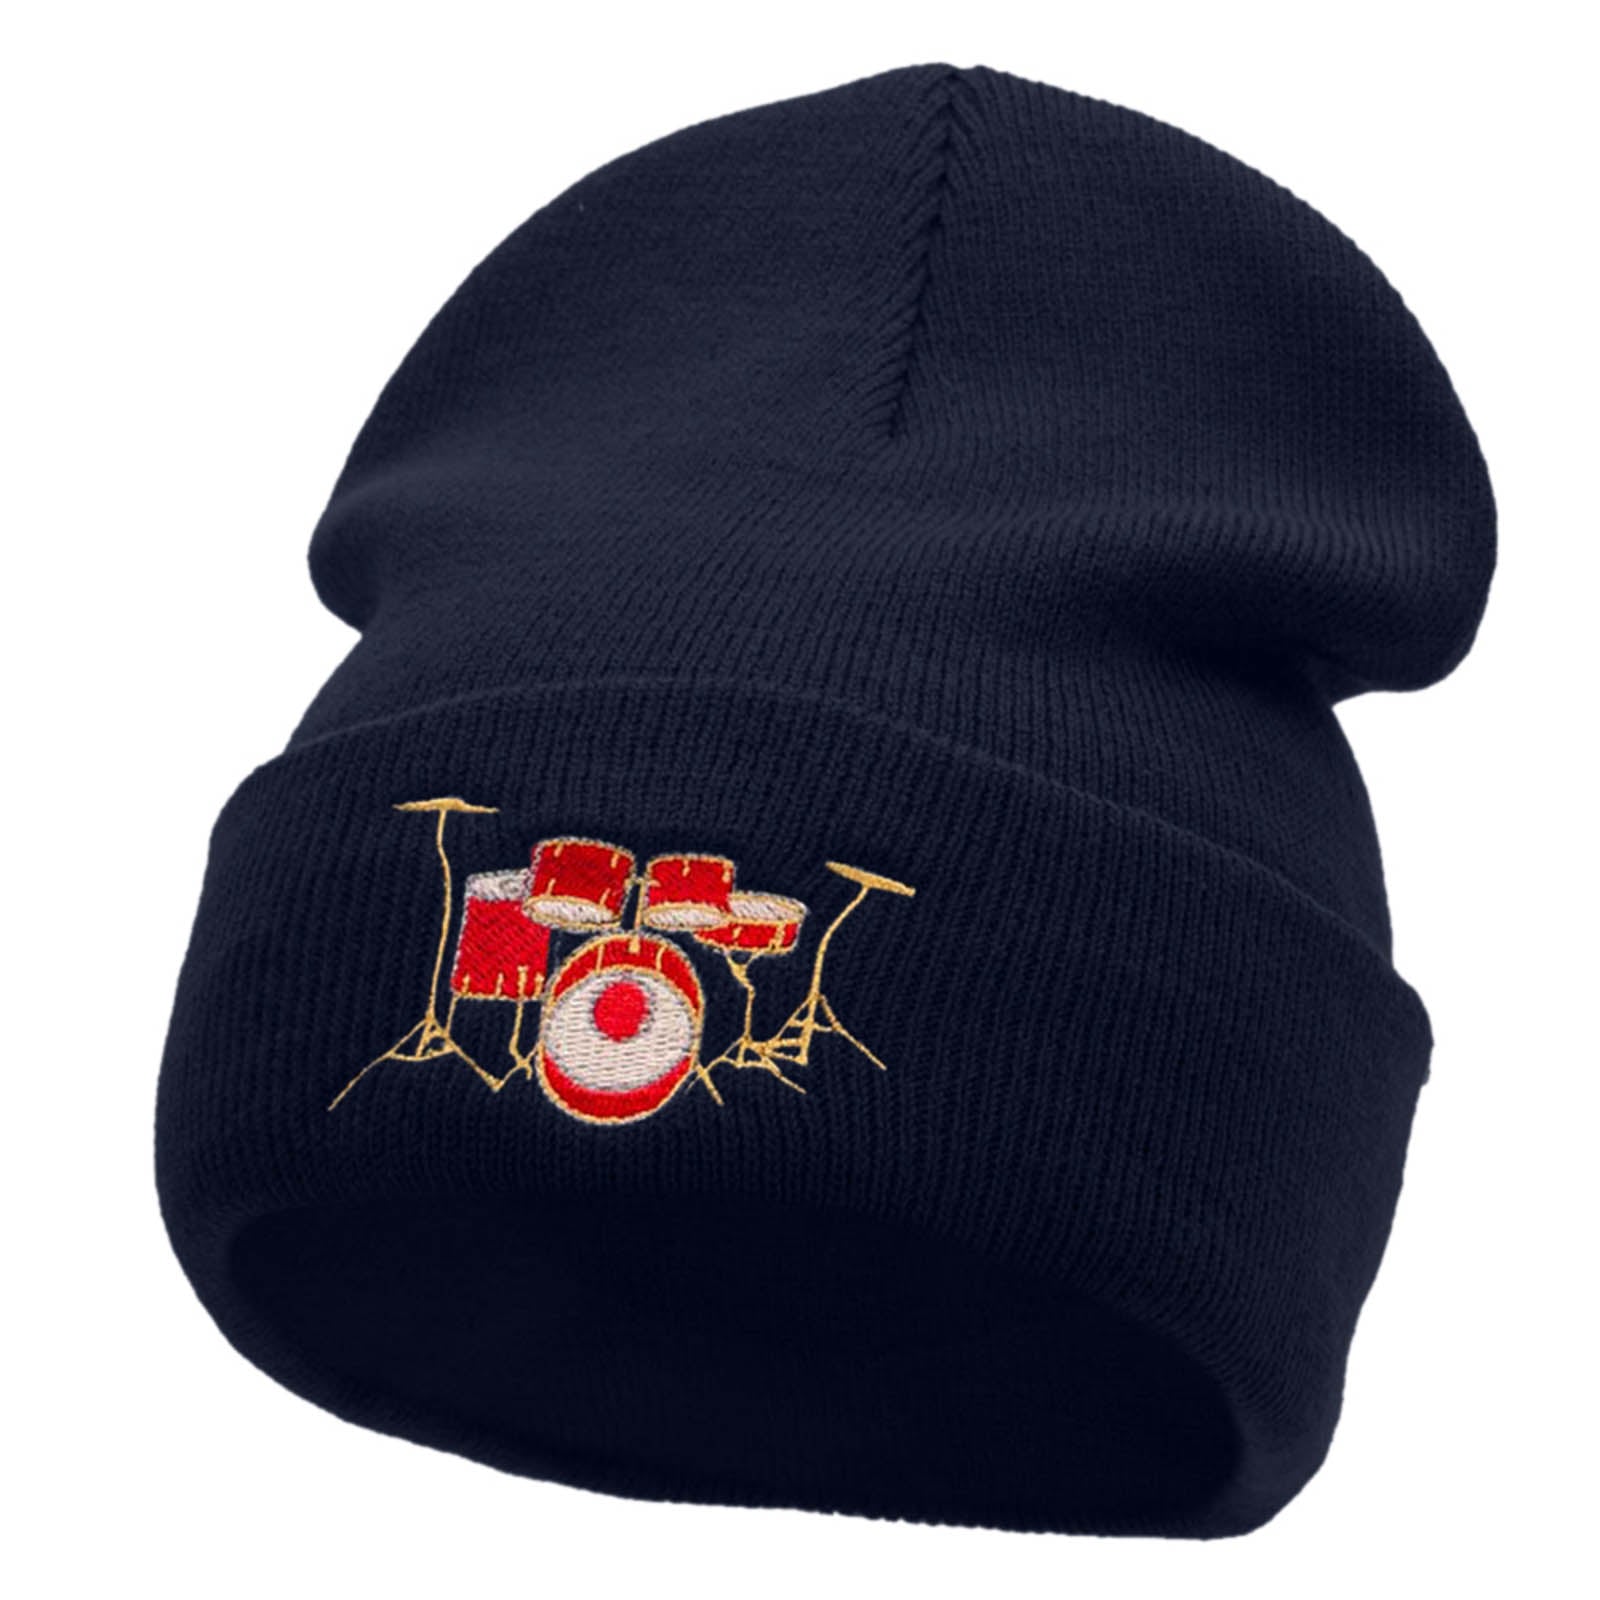 Drum Set Embroidered 12 Inch Long Knitted Beanie - Navy OSFM